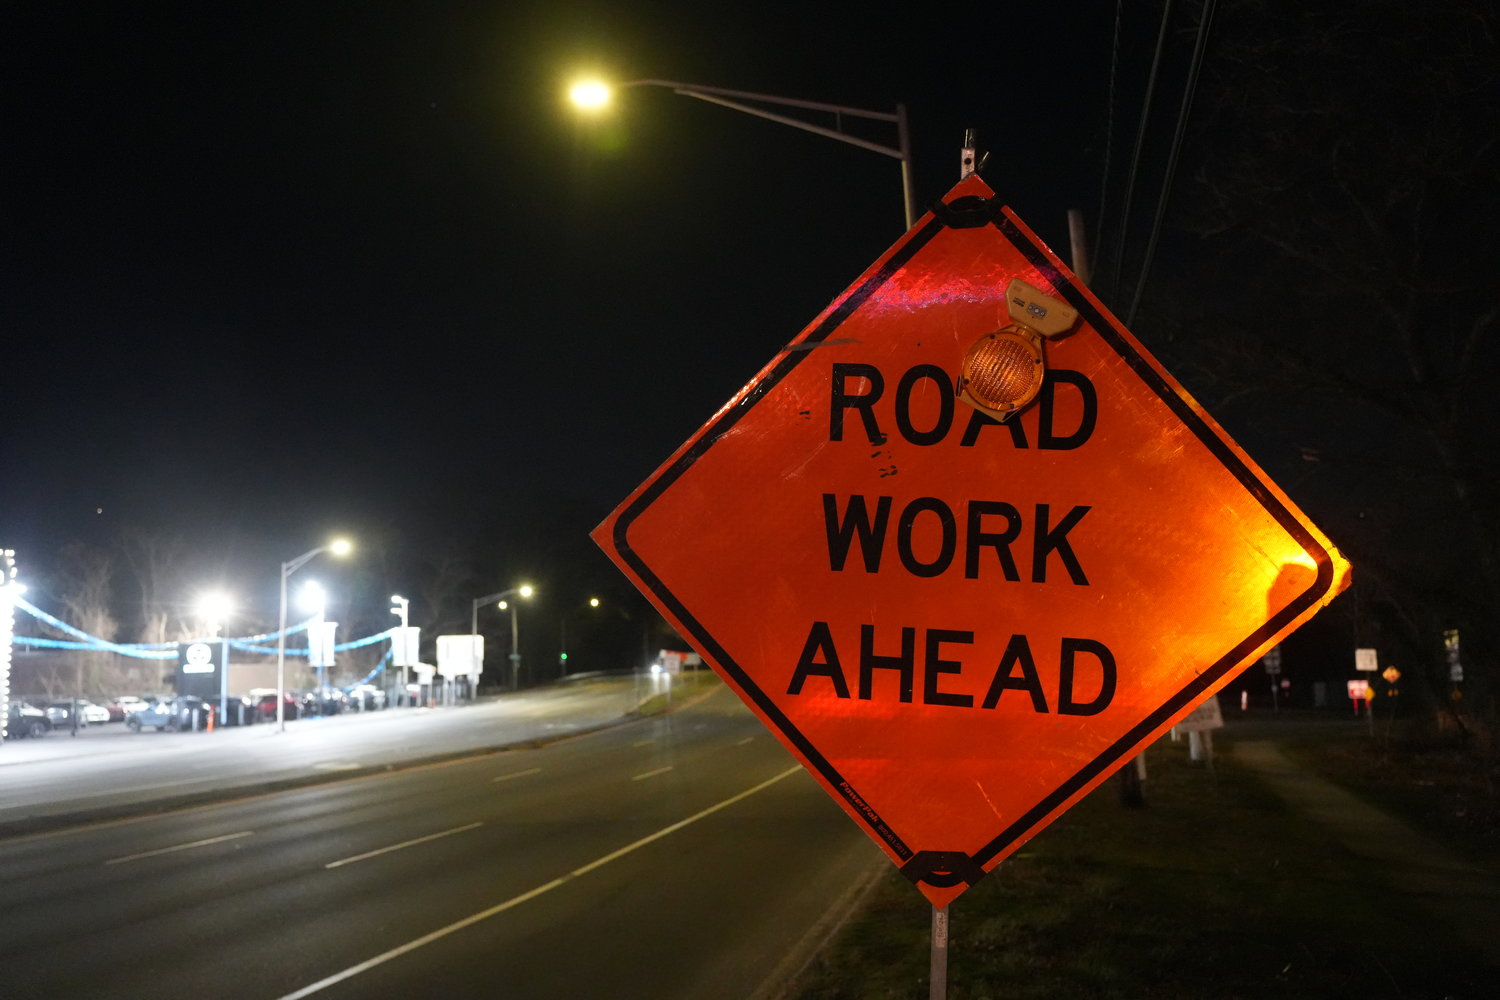 The night work on Sunrise Highway in Wantagh has been disrupting residents’ sleep and causing health
and safety problems, they say.